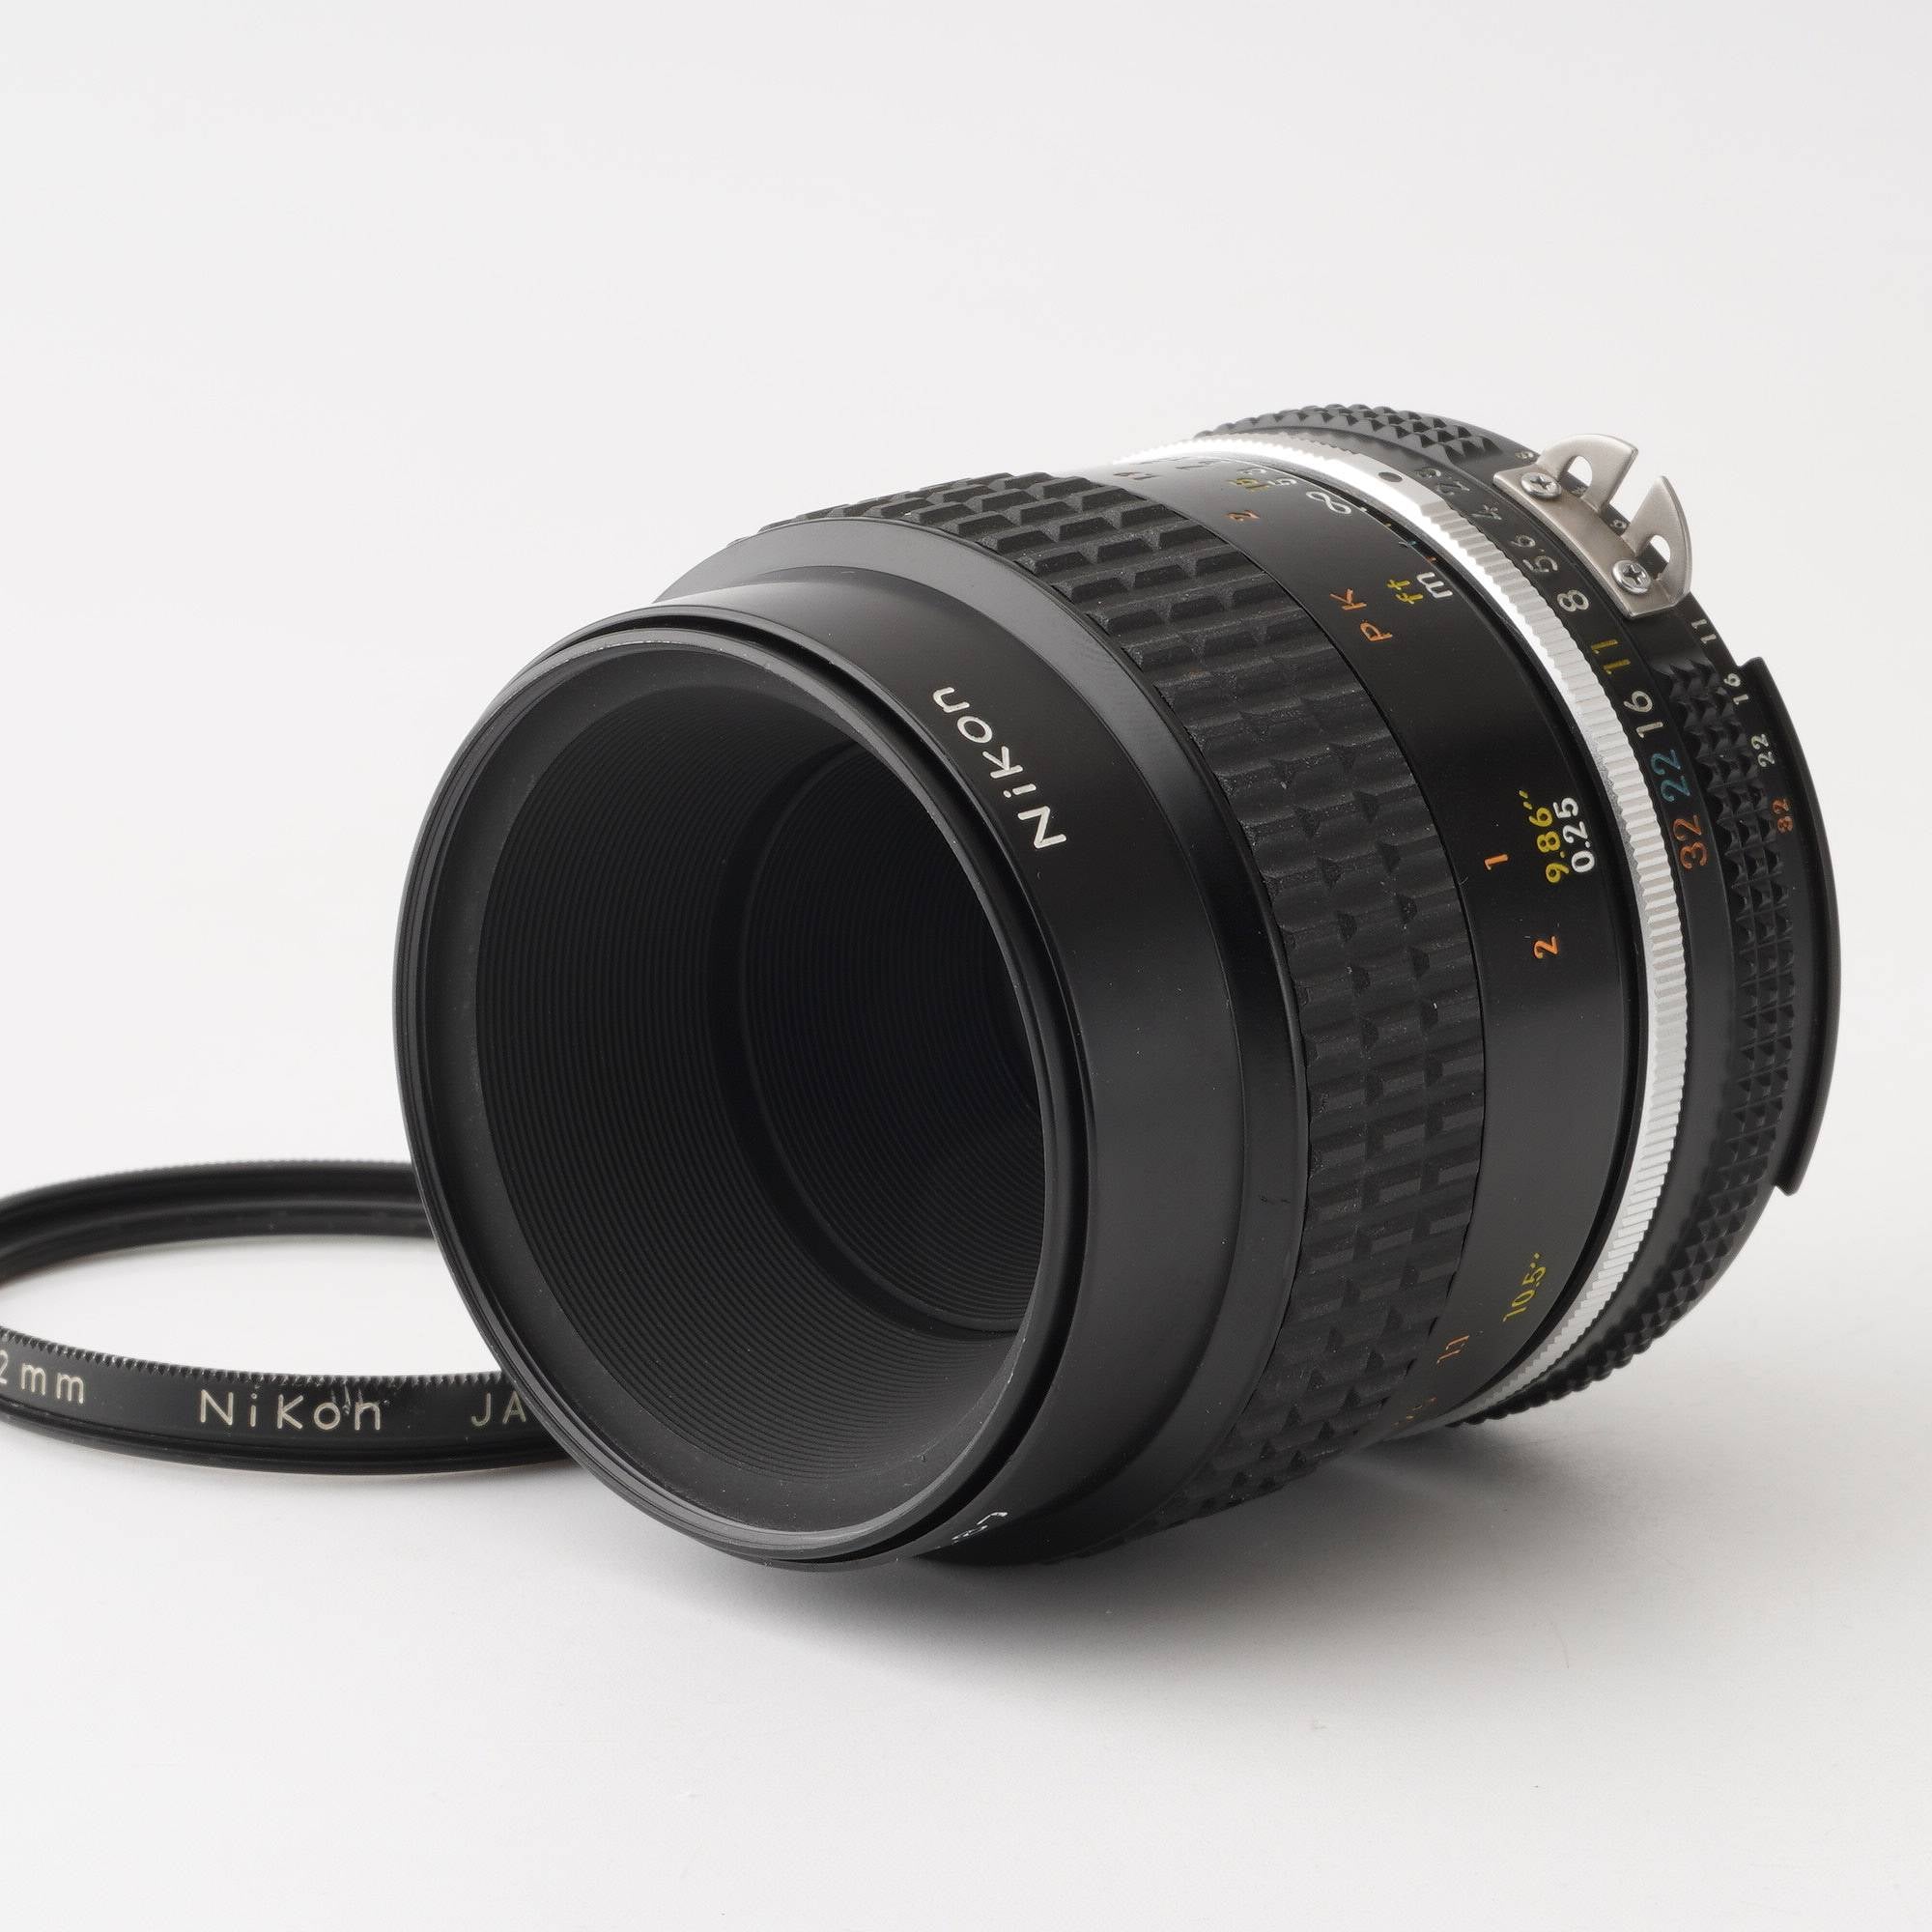 Nikon ニコン Ai-s Micro Nikkor 55mm f2.8